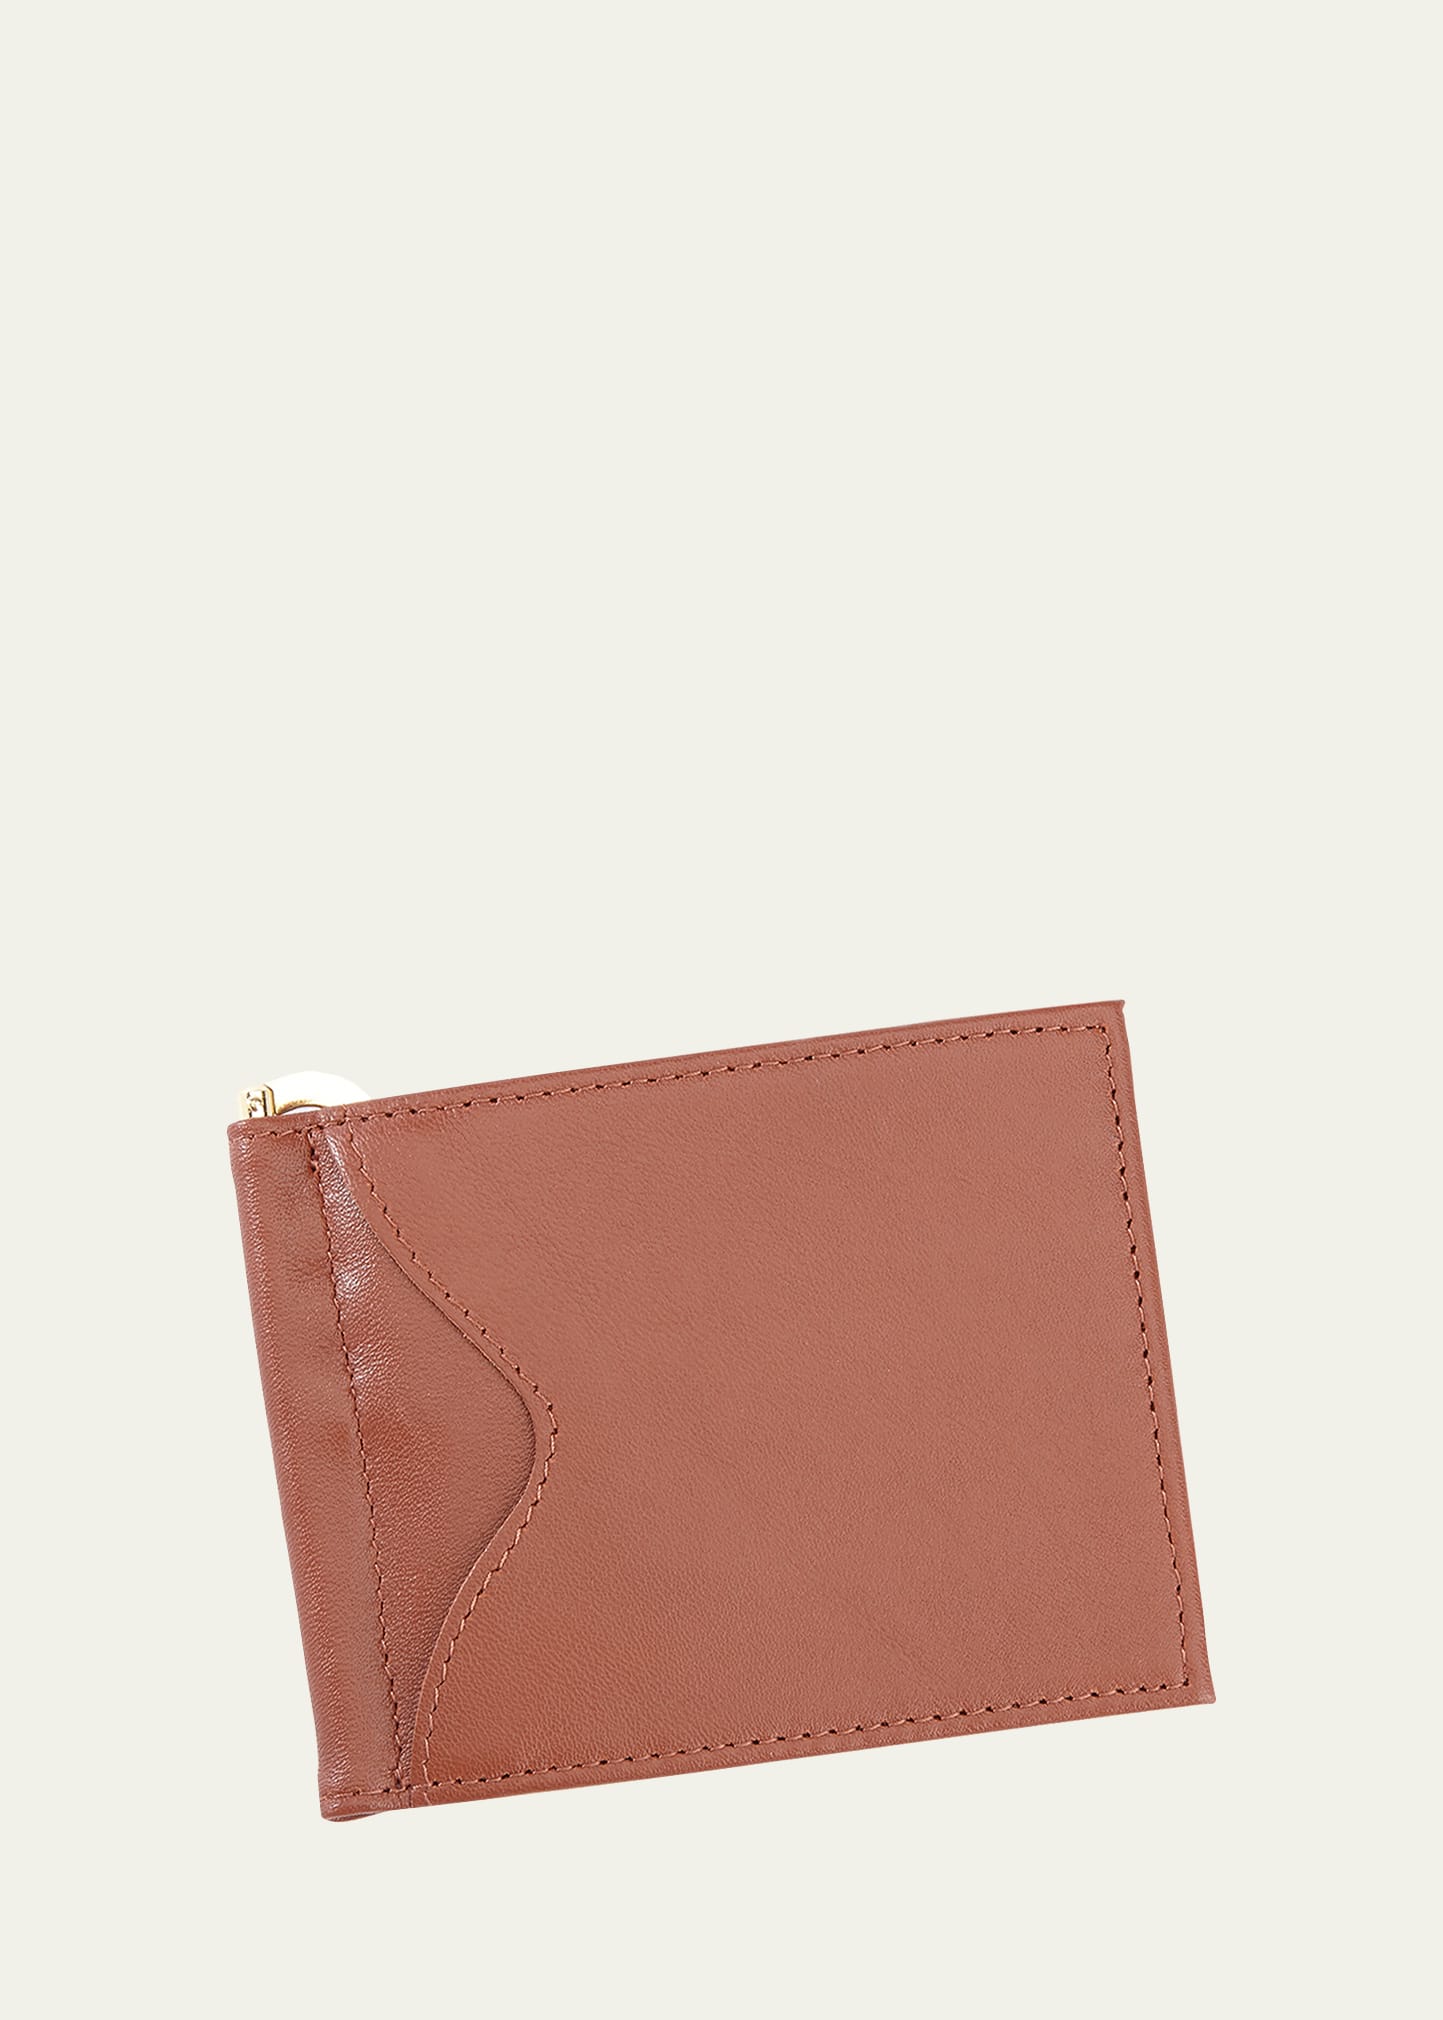 Royce New York Personalized Leather Rfid-blocking Money Clip In Brown